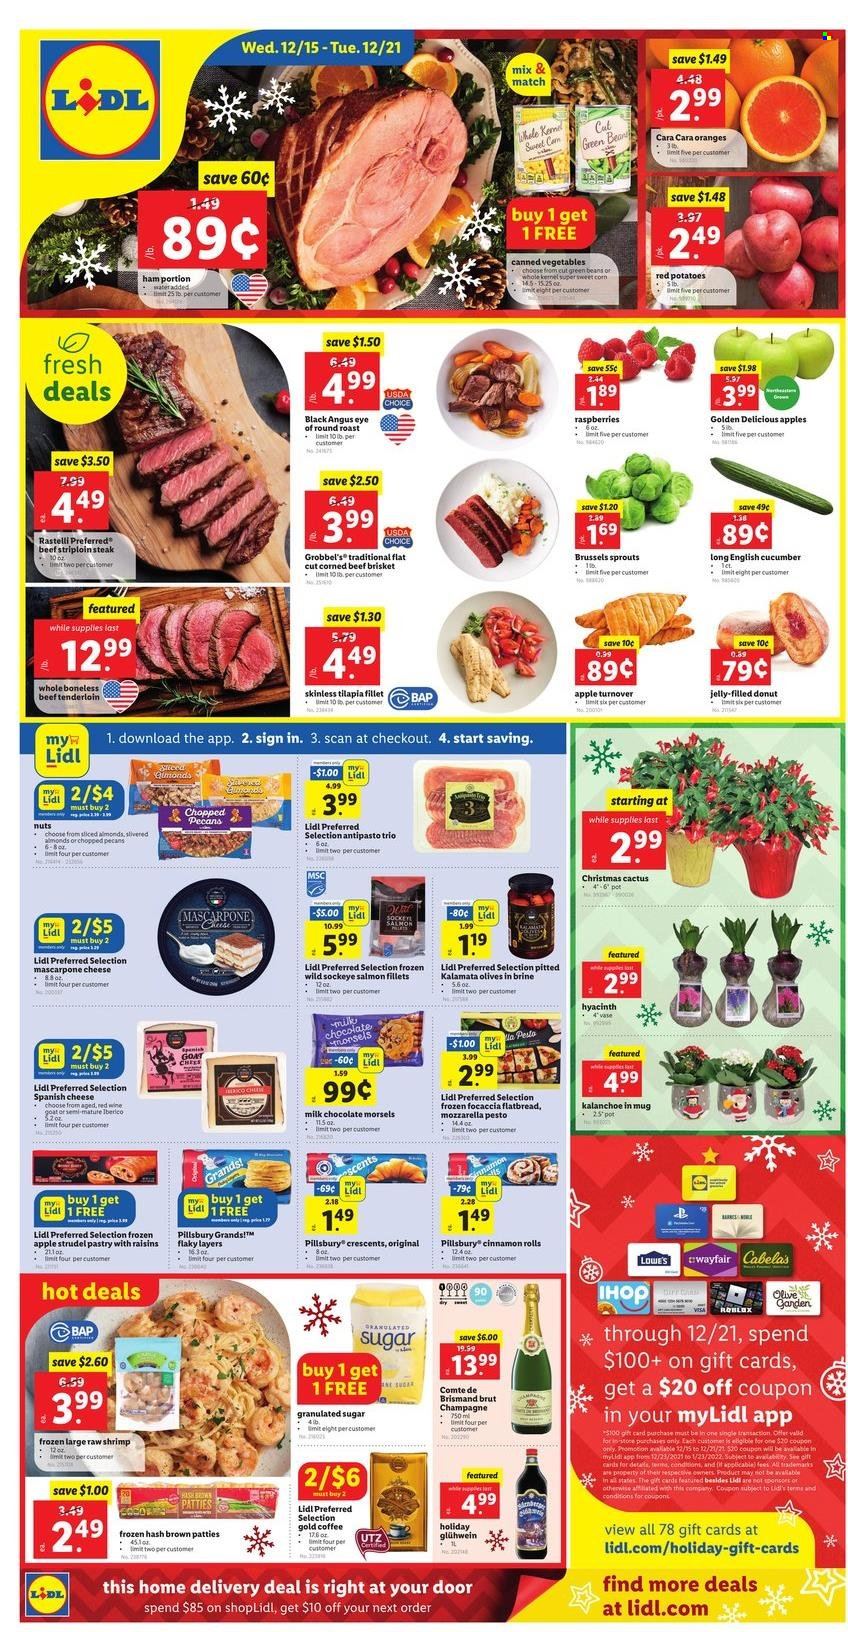 thumbnail - Lidl Flyer - 12/15/2021 - 12/21/2021 - Sales products - strudel, focaccia, flatbread, cinnamon roll, donut, corn, green beans, potatoes, brussel sprouts, red potatoes, oranges, Golden Delicious, salmon, salmon fillet, tilapia, shrimps, Pillsbury, ham, corned beef, mascarpone, mozzarella, cheese, milk chocolate, chocolate, jelly, granulated sugar, sugar, olives, canned vegetables, pesto, almonds, raisins, pecans, dried fruit, coffee, champagne, beef meat, steak, beef tenderloin, eye of round, round roast, striploin steak, beef brisket, lid, mug, pot, vase, socket, tong, cactus, hyacinth. Page 1.